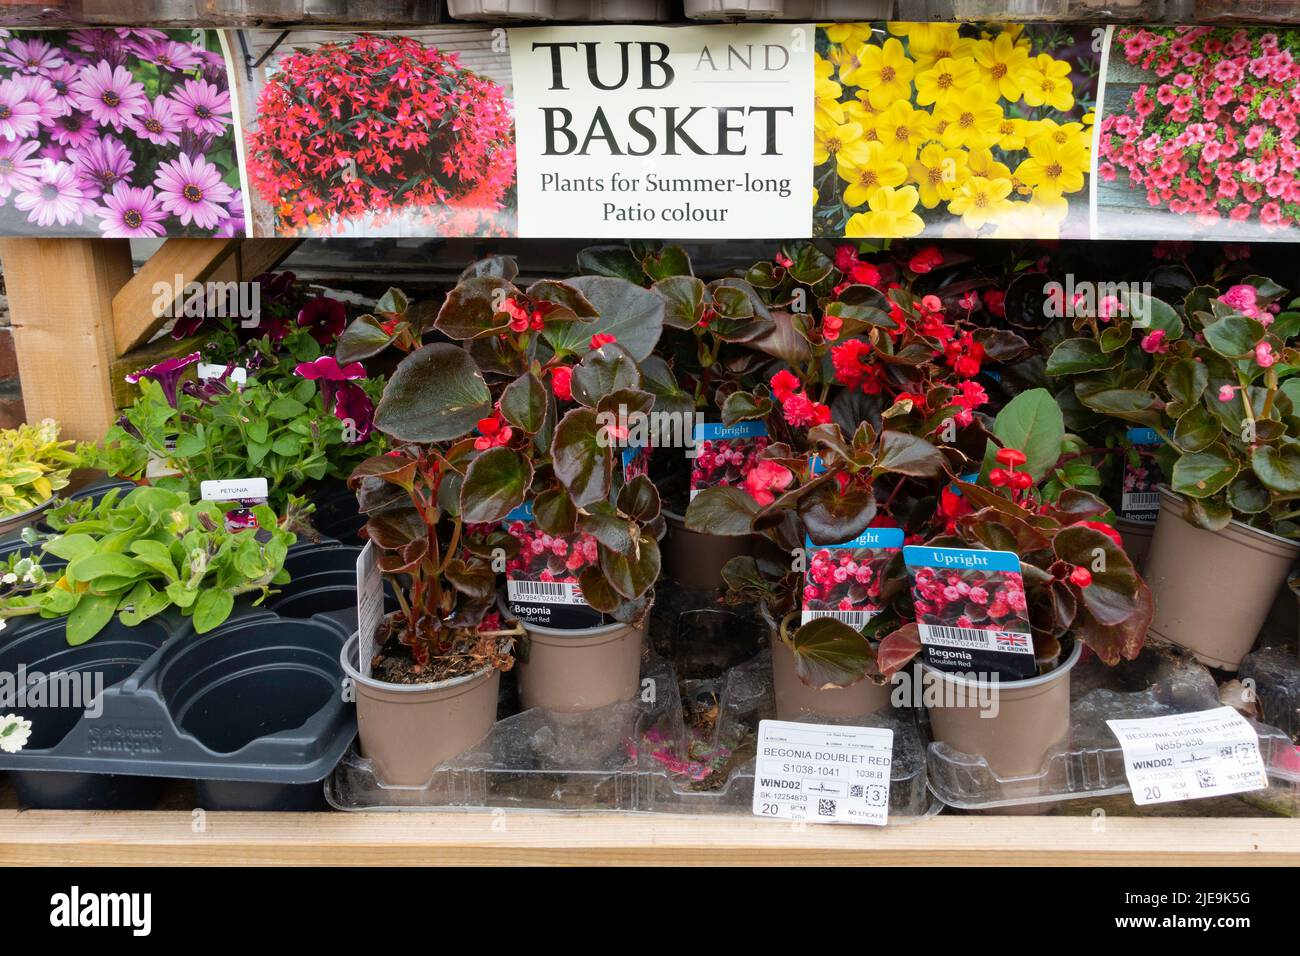 A display of Tub and Basket plants   in a garden centre for summer long patio colour Stock Photo